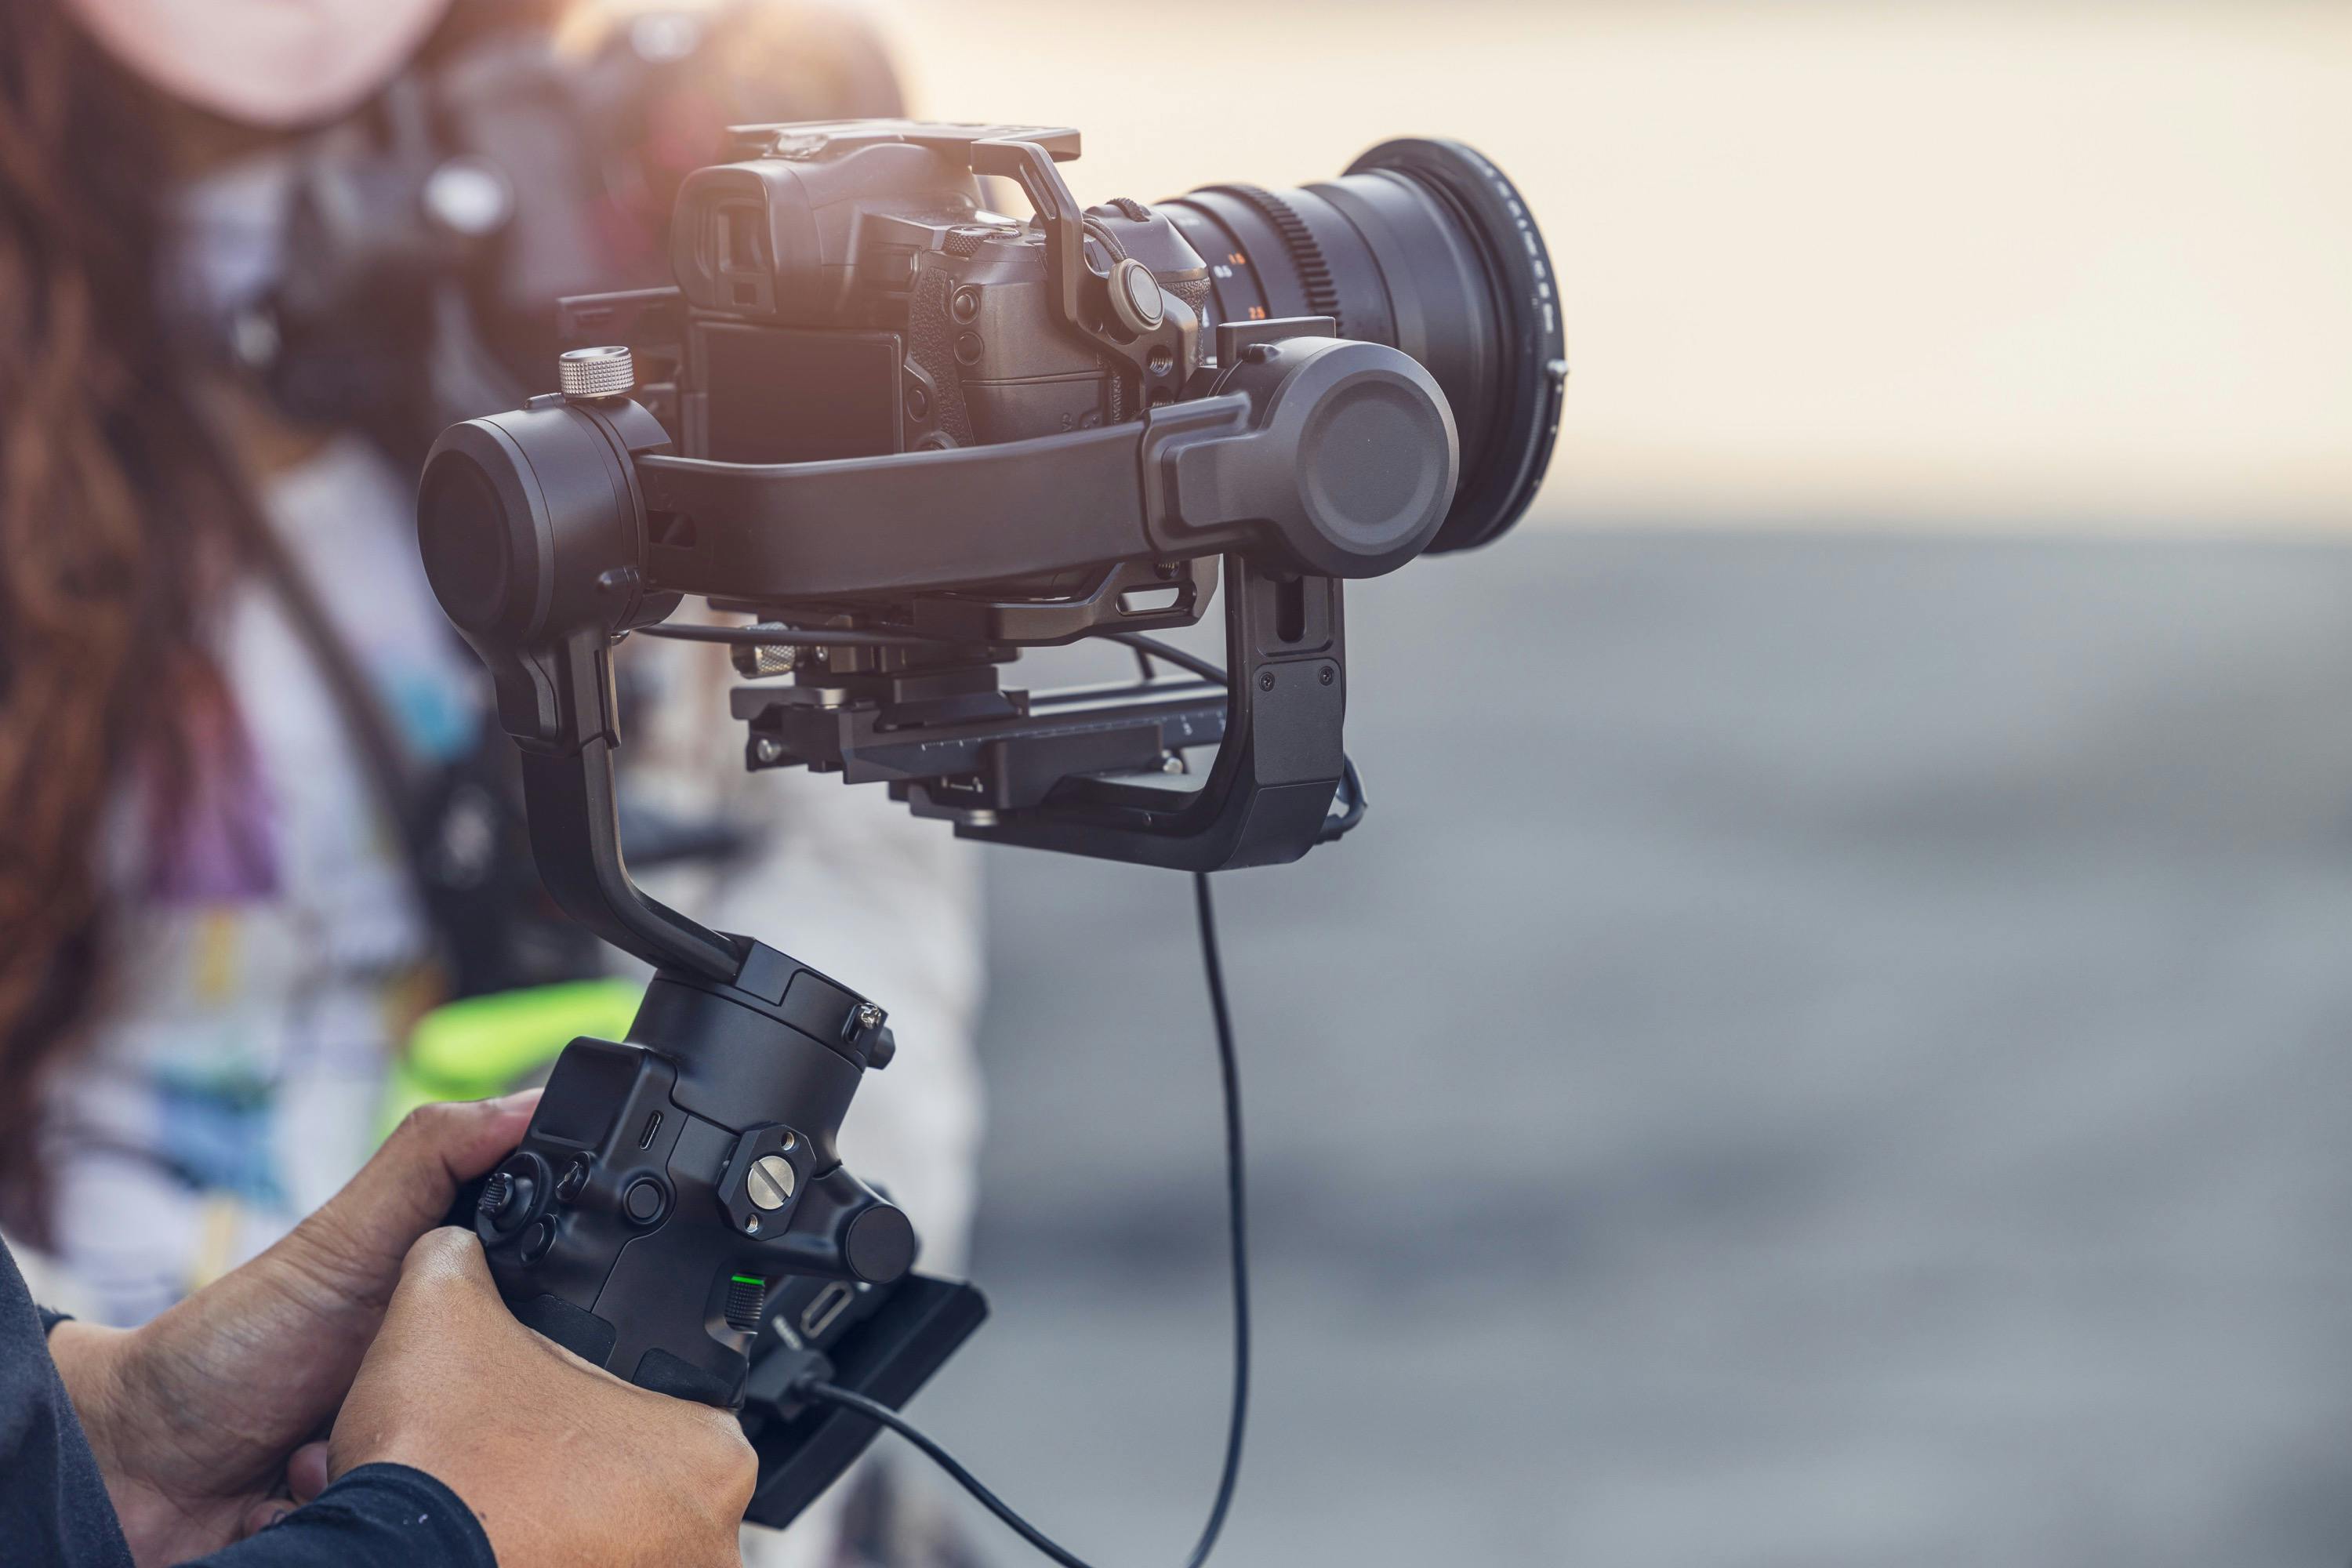 Hands of a person holding a gimbal stabilizer with a mirrorless camera attached.